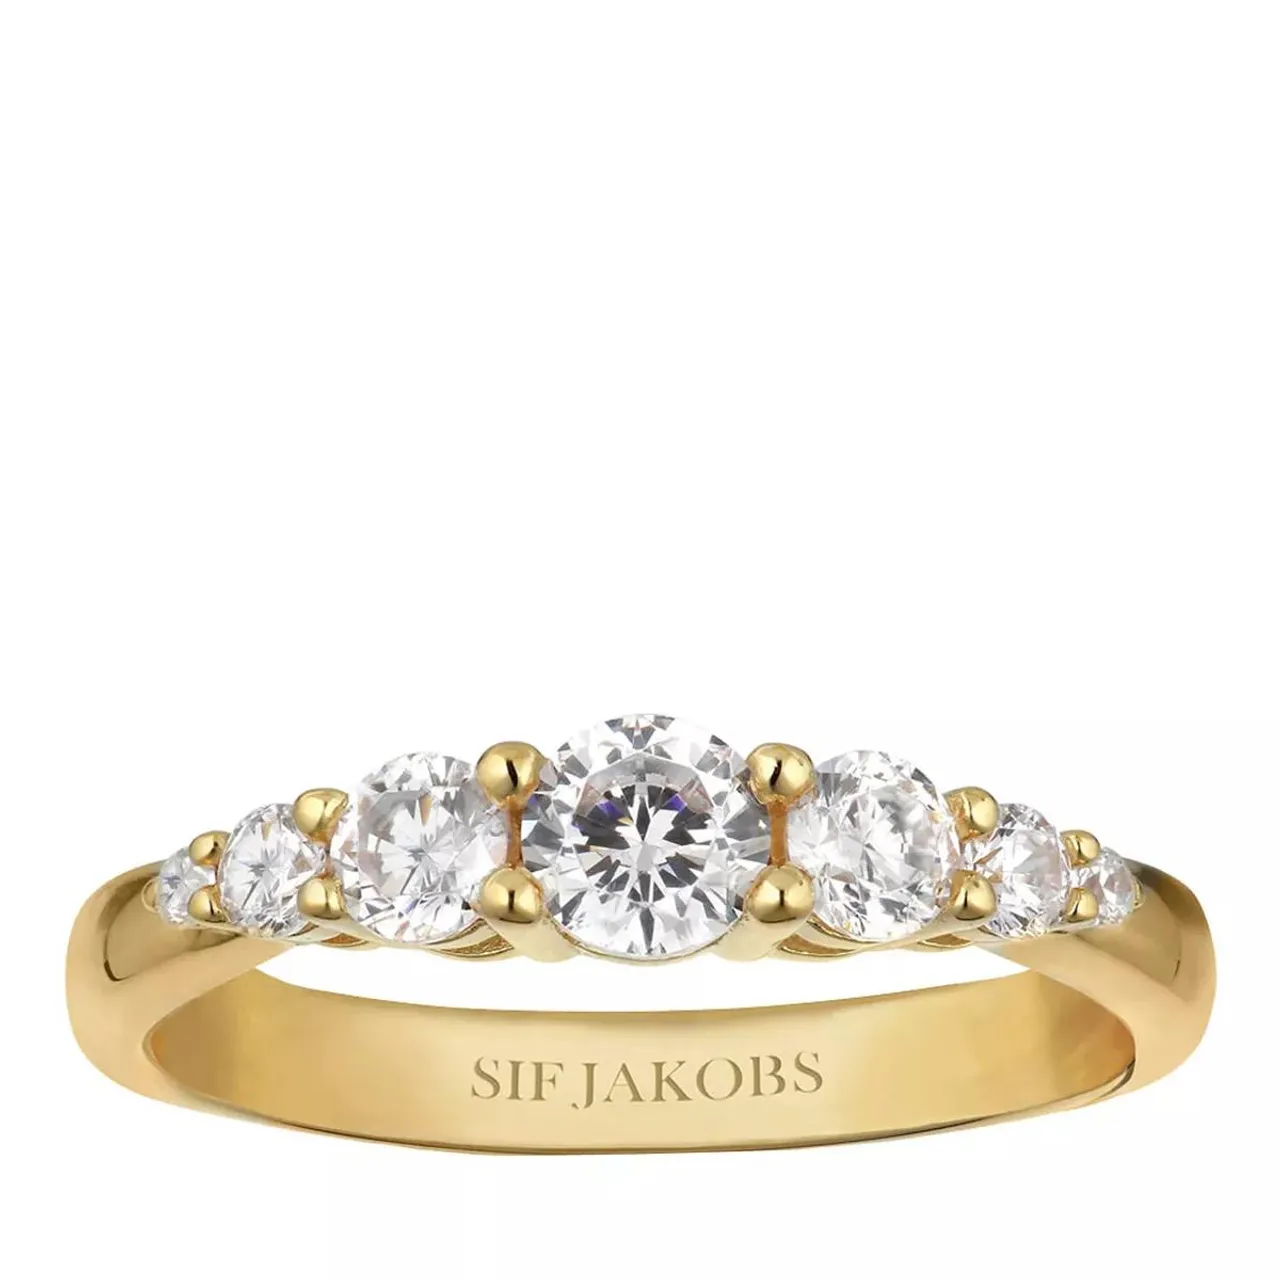 Sif Jakobs Jewellery Rings - Belluno Ring - gold - Rings for ladies